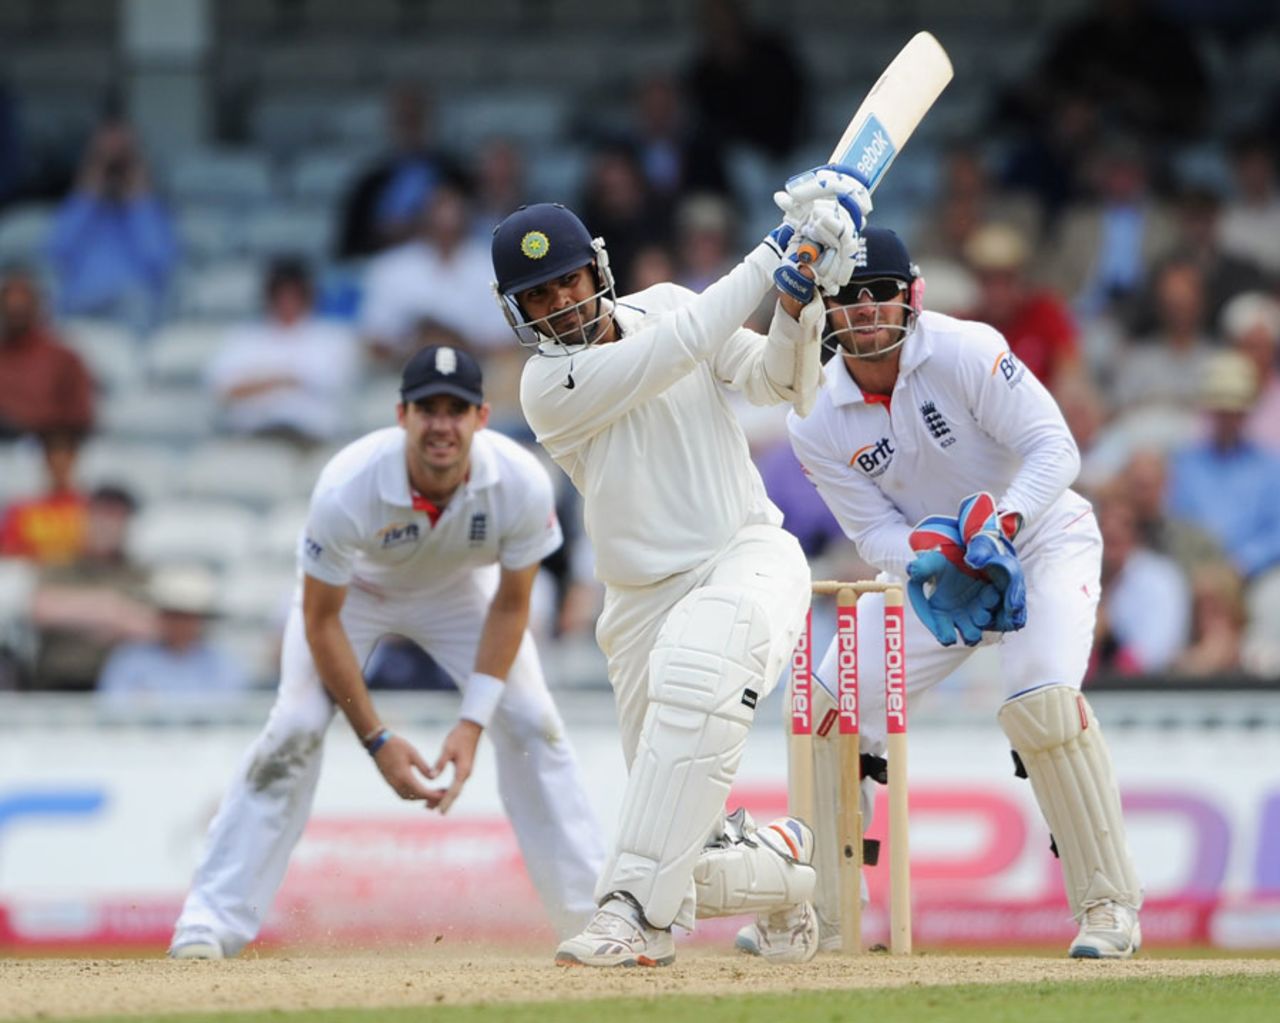 RP Singh swings away through the leg side, England v India, 4th Test, The Oval, 4th day, August 21, 2011